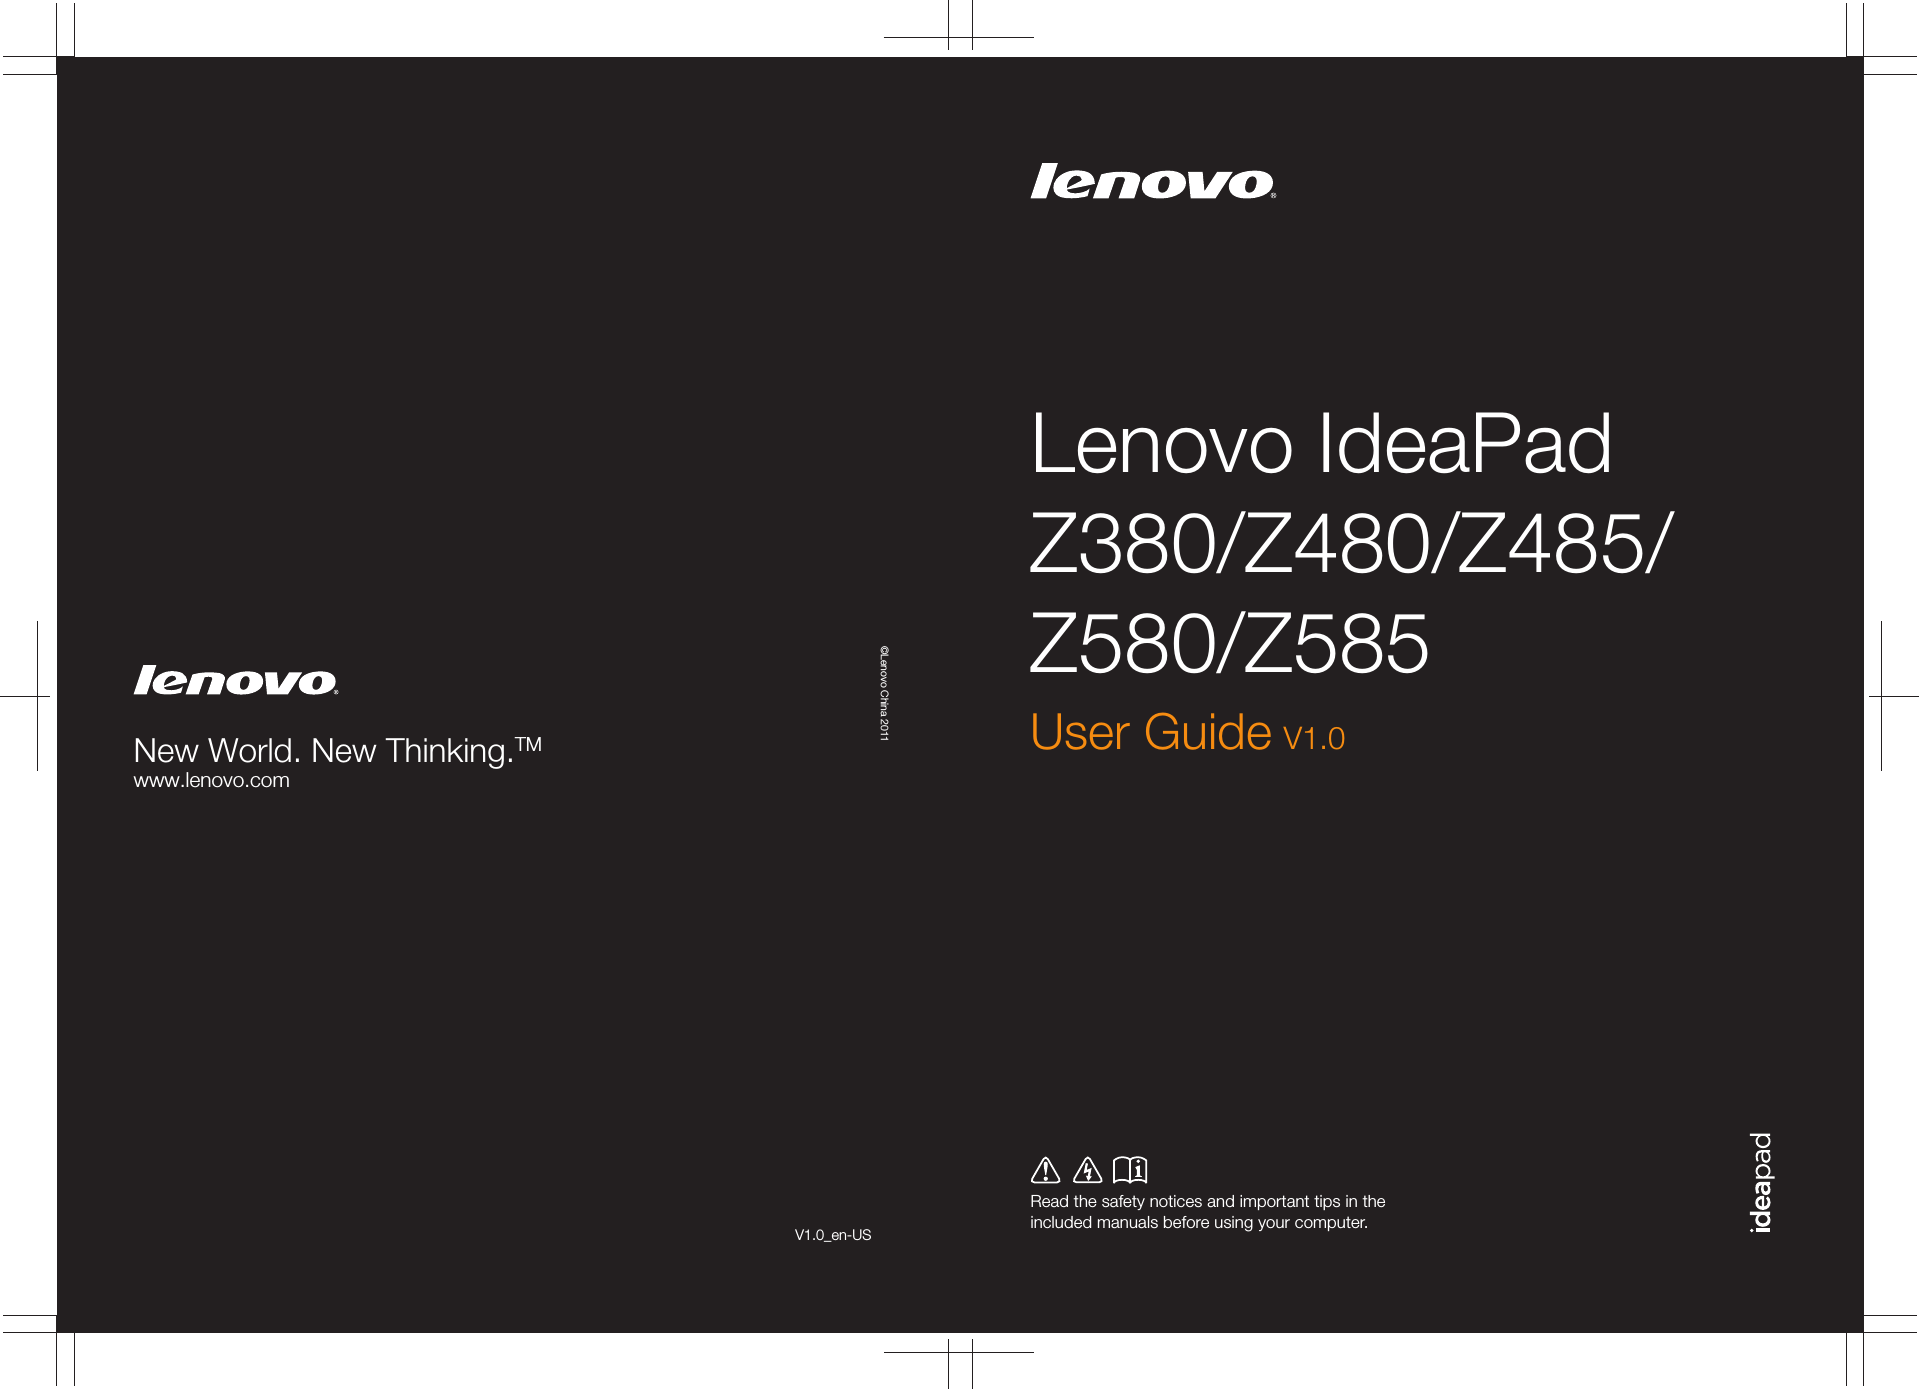 Lenovo IdeaPad Z380/Z480/Z485/Z580/Z585Read the safety notices and important tips in the included manuals before using your computer.©Lenovo China 2011New World. New Thinking.TMwww.lenovo.comUser Guide V1.0V1.0_en-US